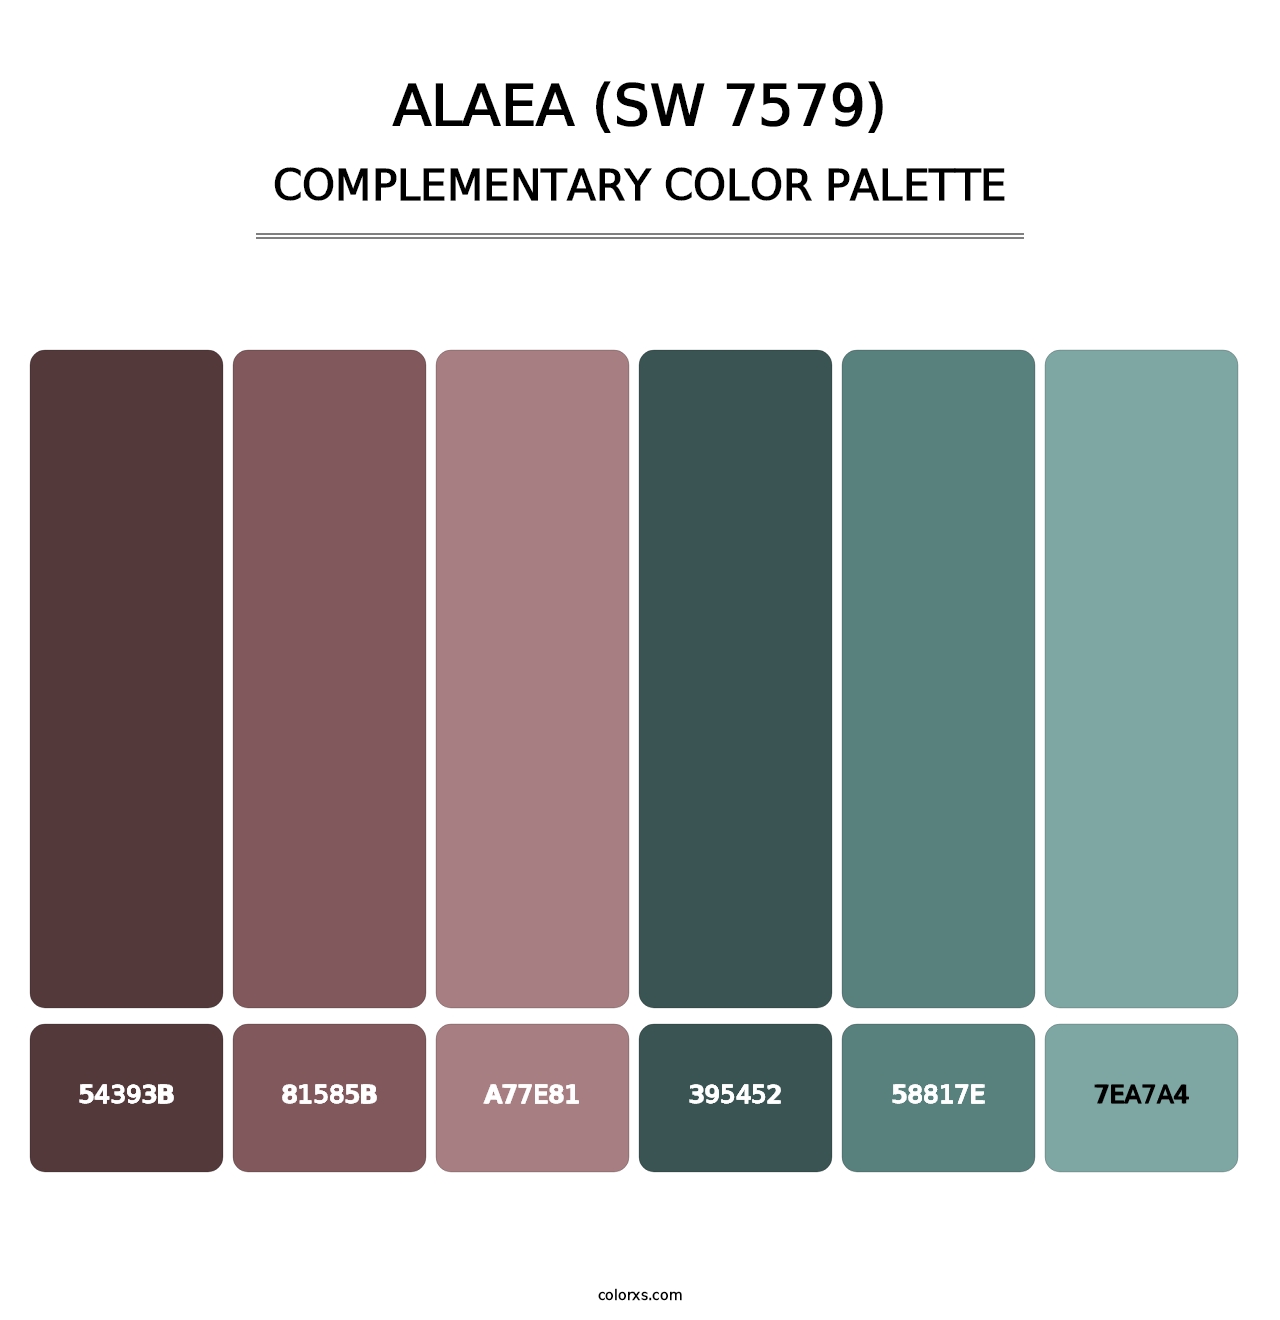 Alaea (SW 7579) - Complementary Color Palette